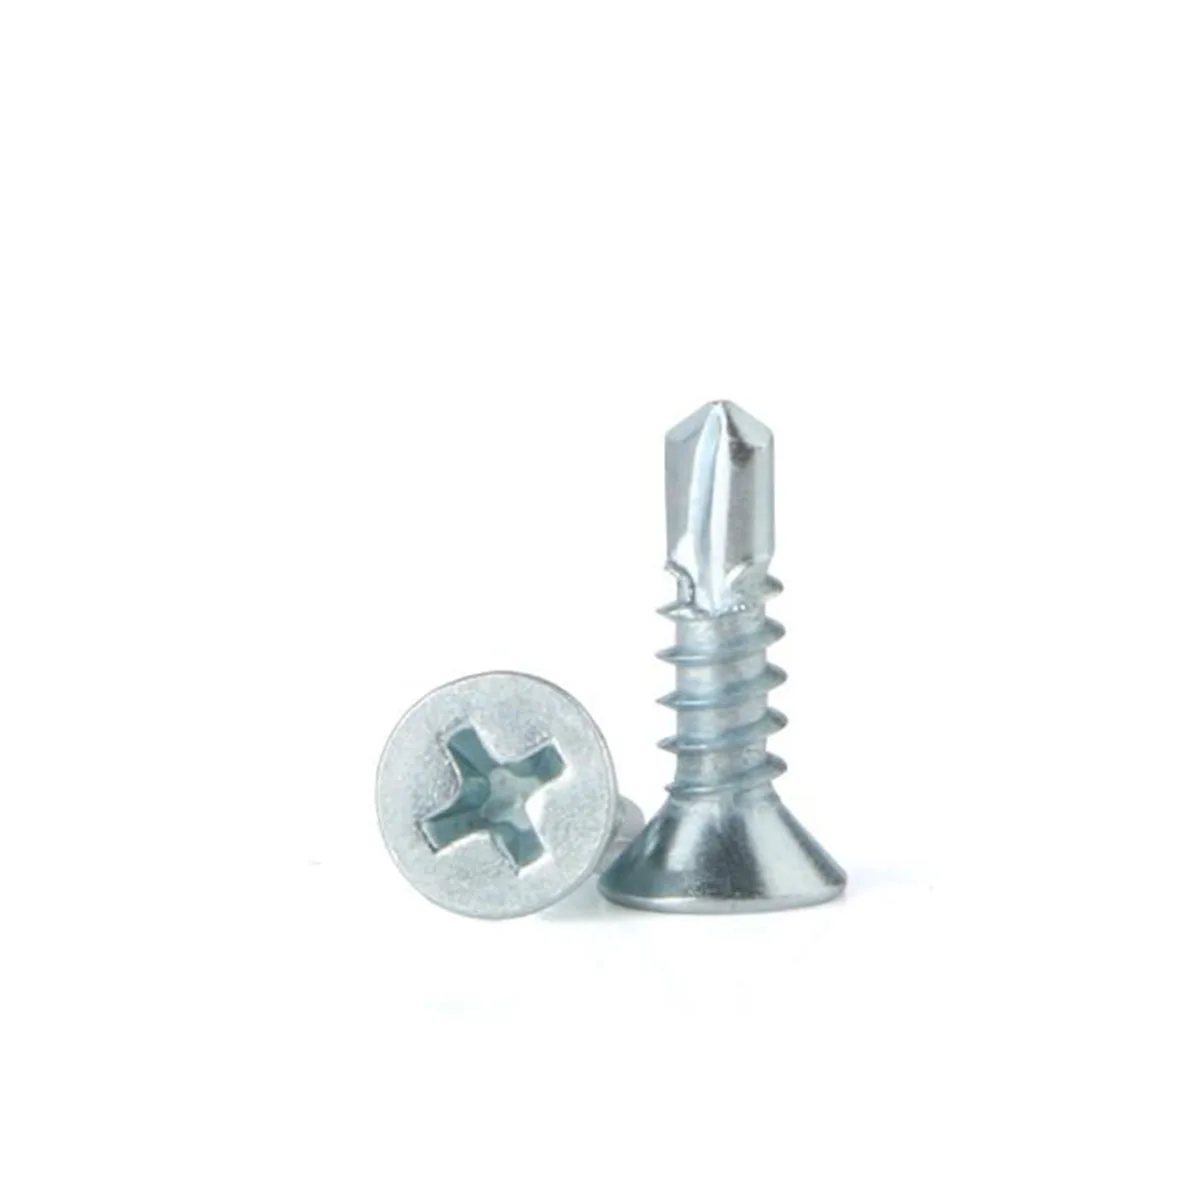 Self drilling and self tapping Drill tail screw DIN7504 (1600082264701)